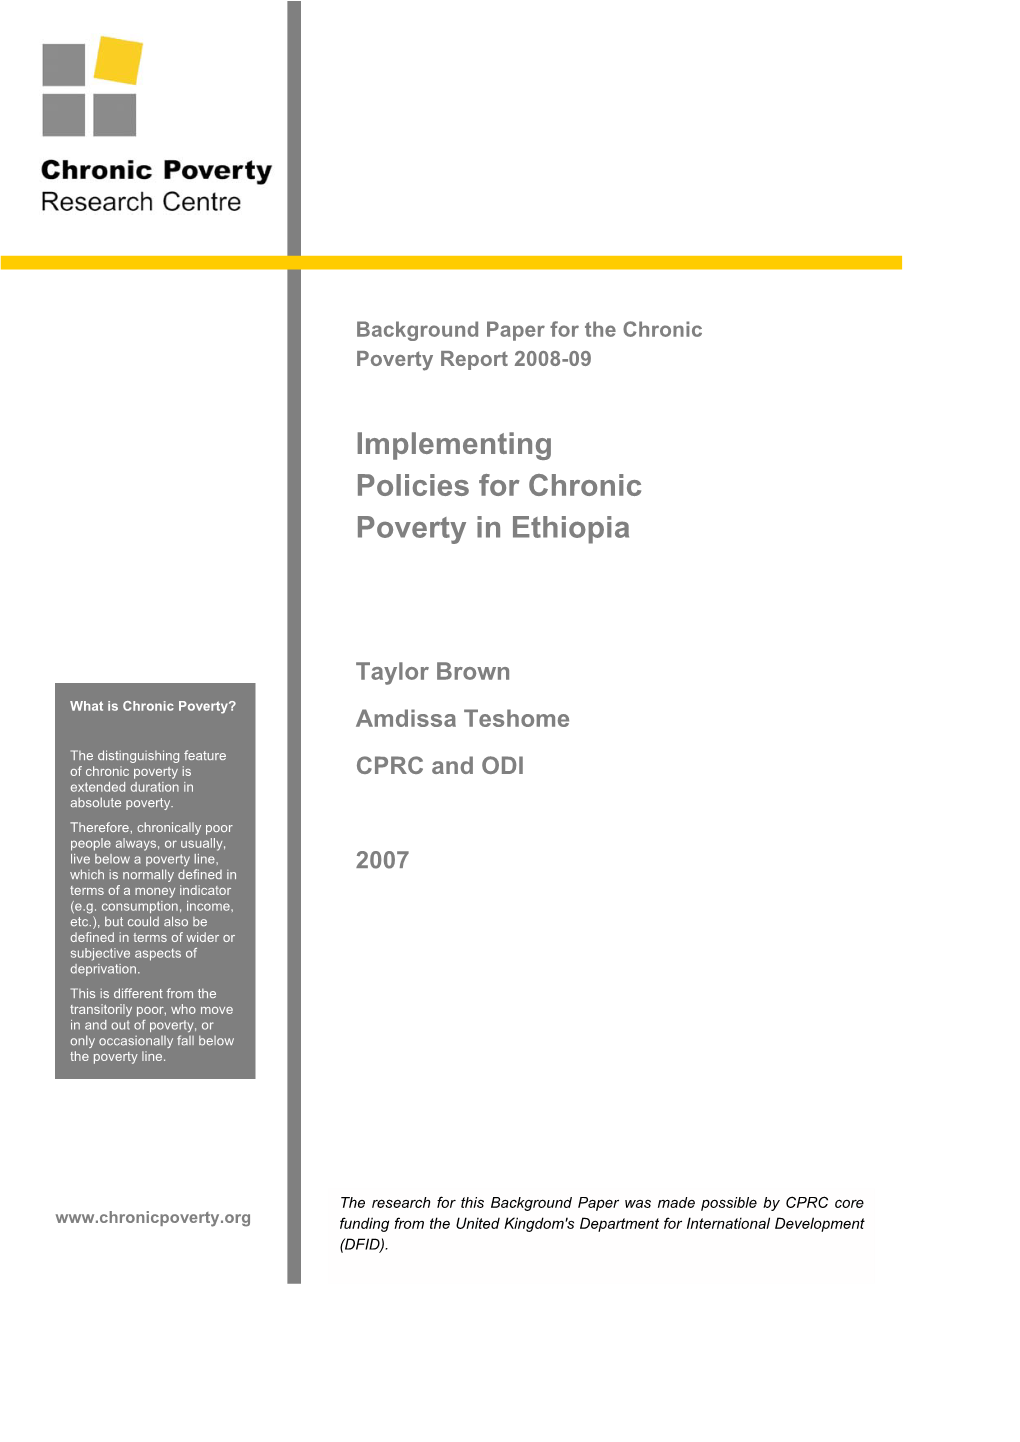 Implementing Policies for Chronic Poverty in Ethiopia